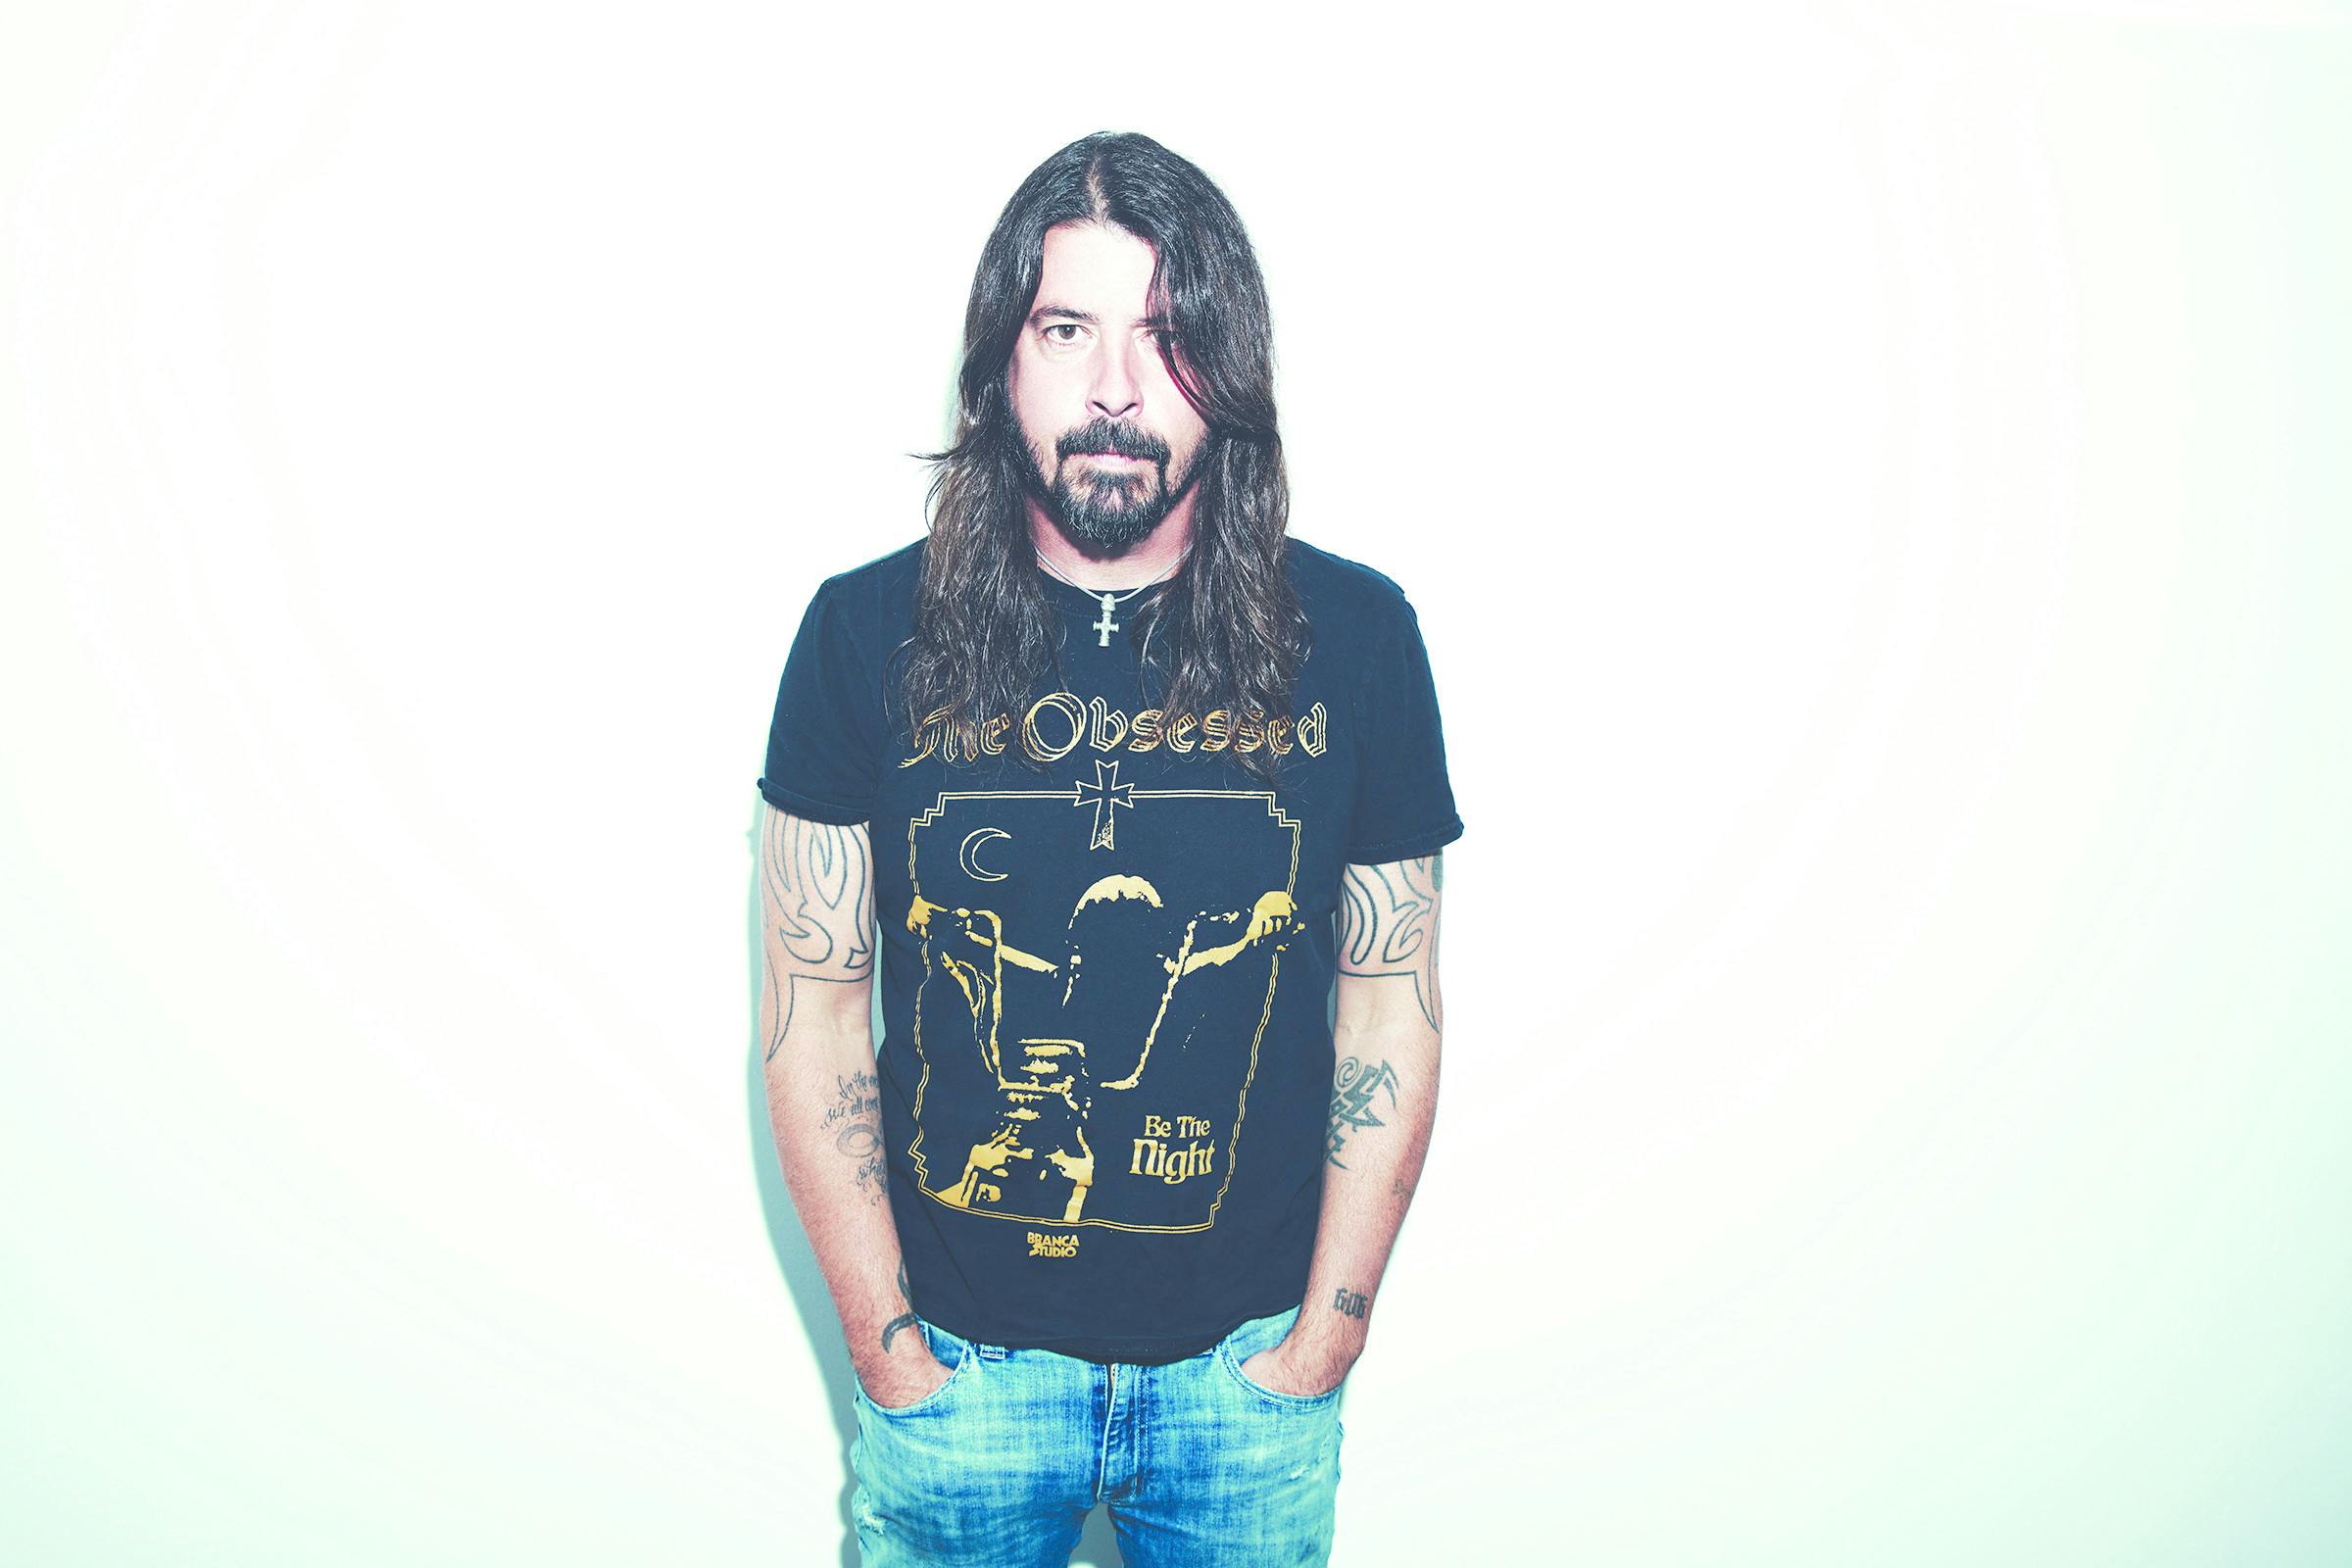 Dave Grohl On A Second Sonic Highways Series: "That Door Is Always Open…"